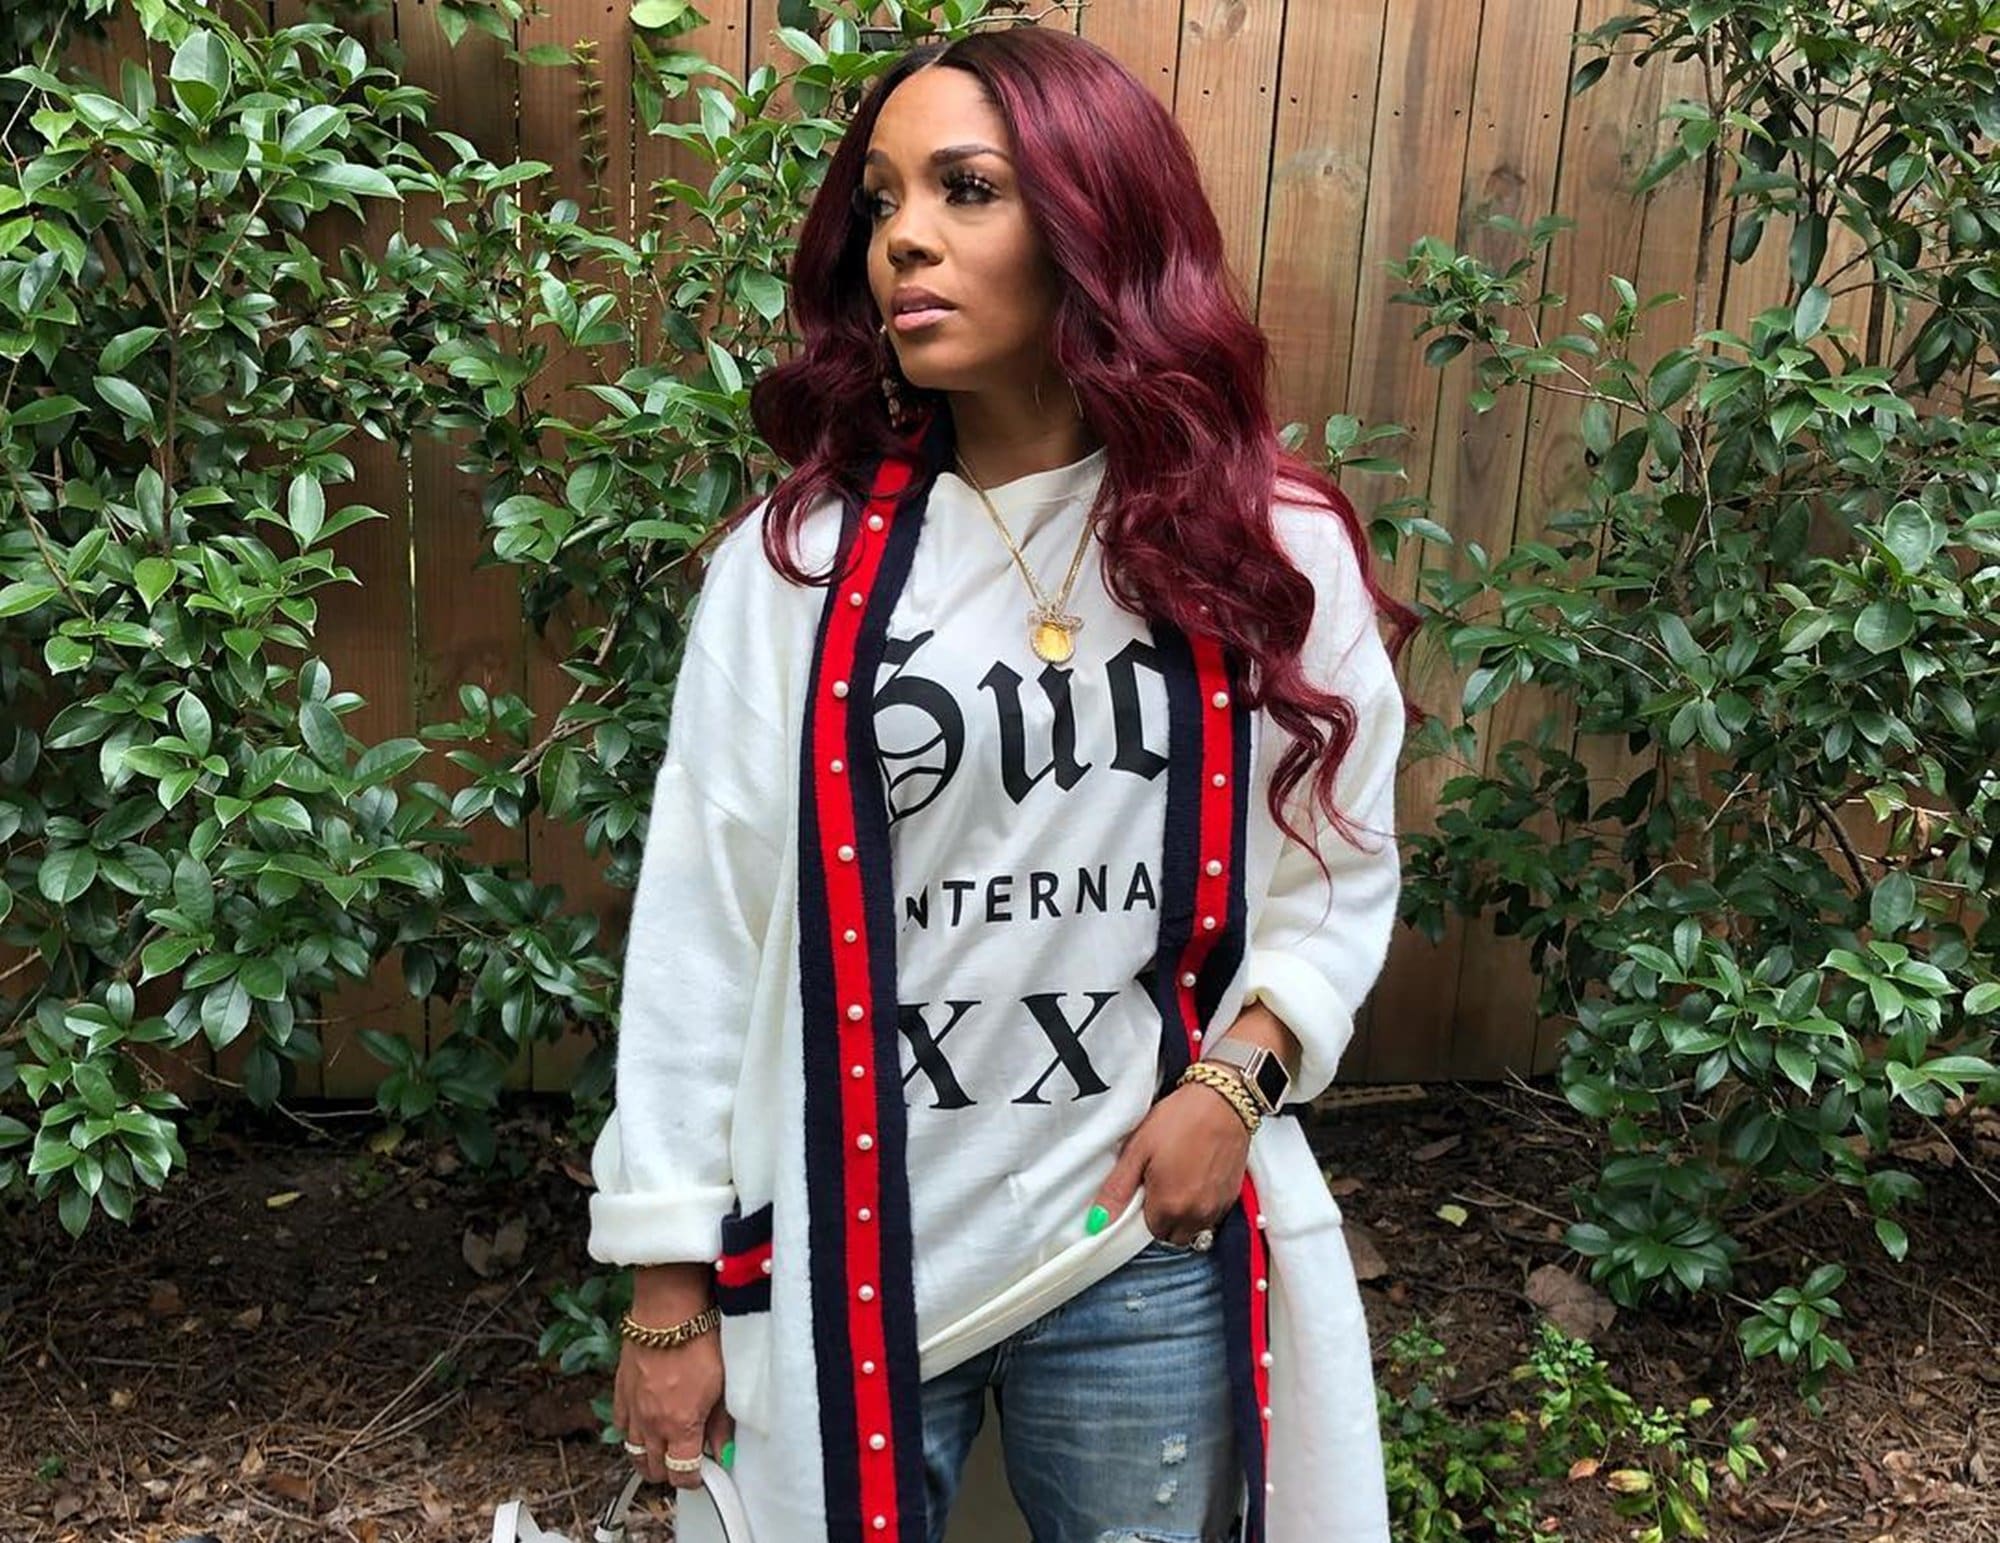 Rasheeda Frost's Fans Call Her An Inspirational Businesswoman After She Invites Everyone To The Fashion Insider Panel To See Her